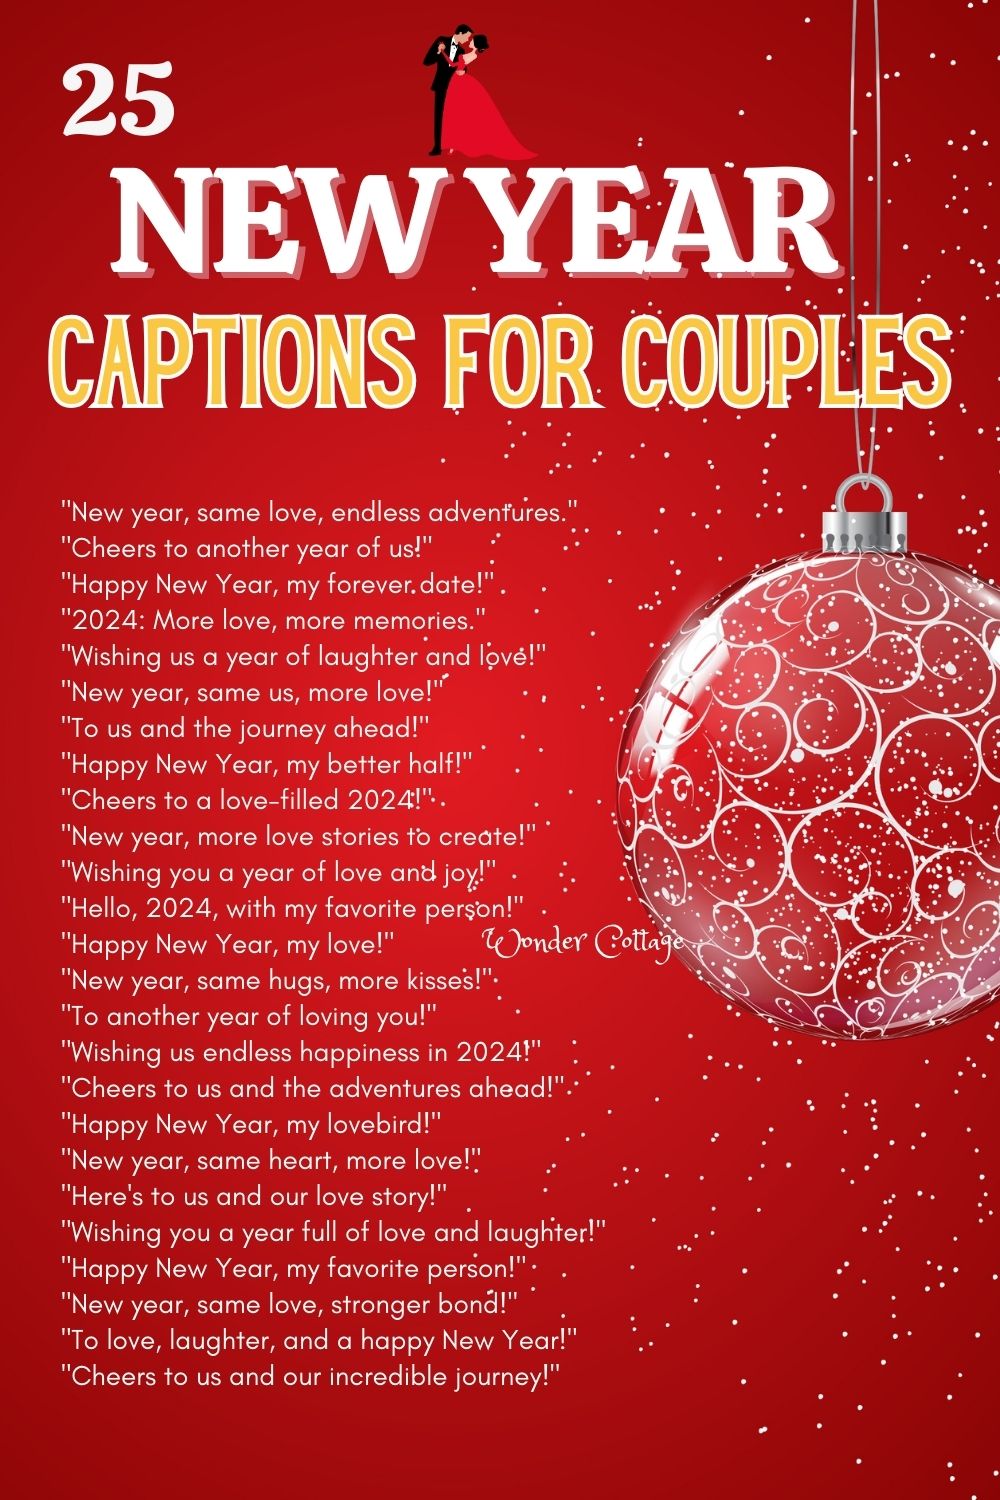  New Year Captions For Couples